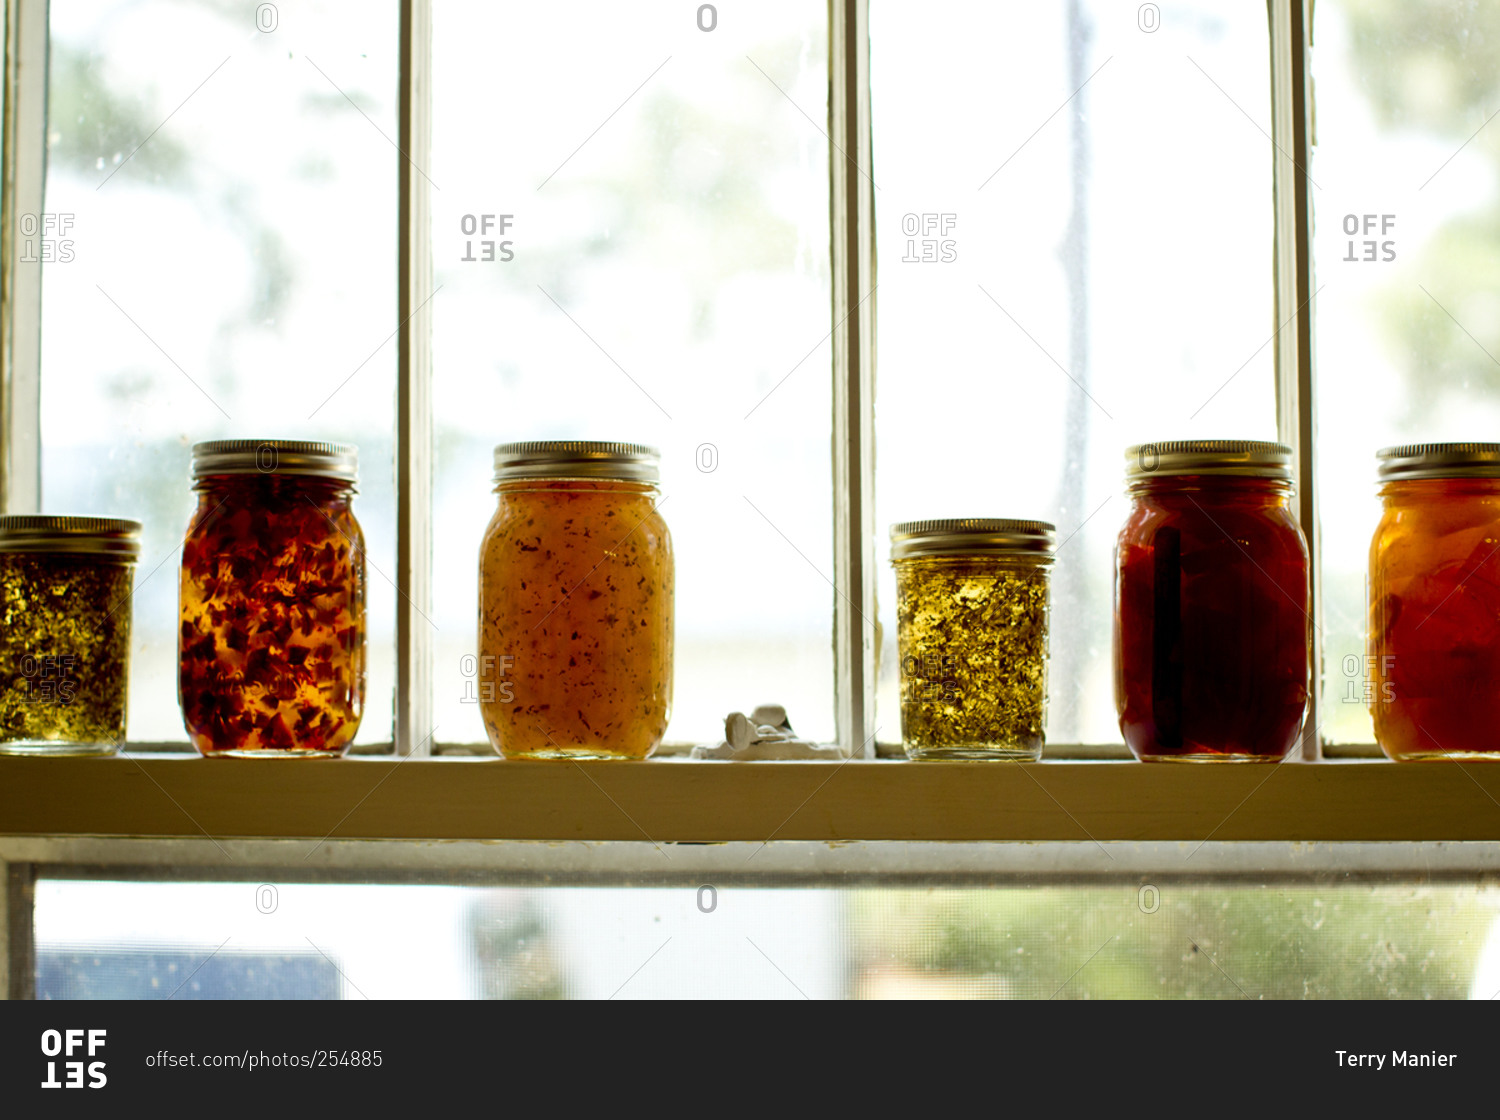 Jars of jellies and preserves on a window sill